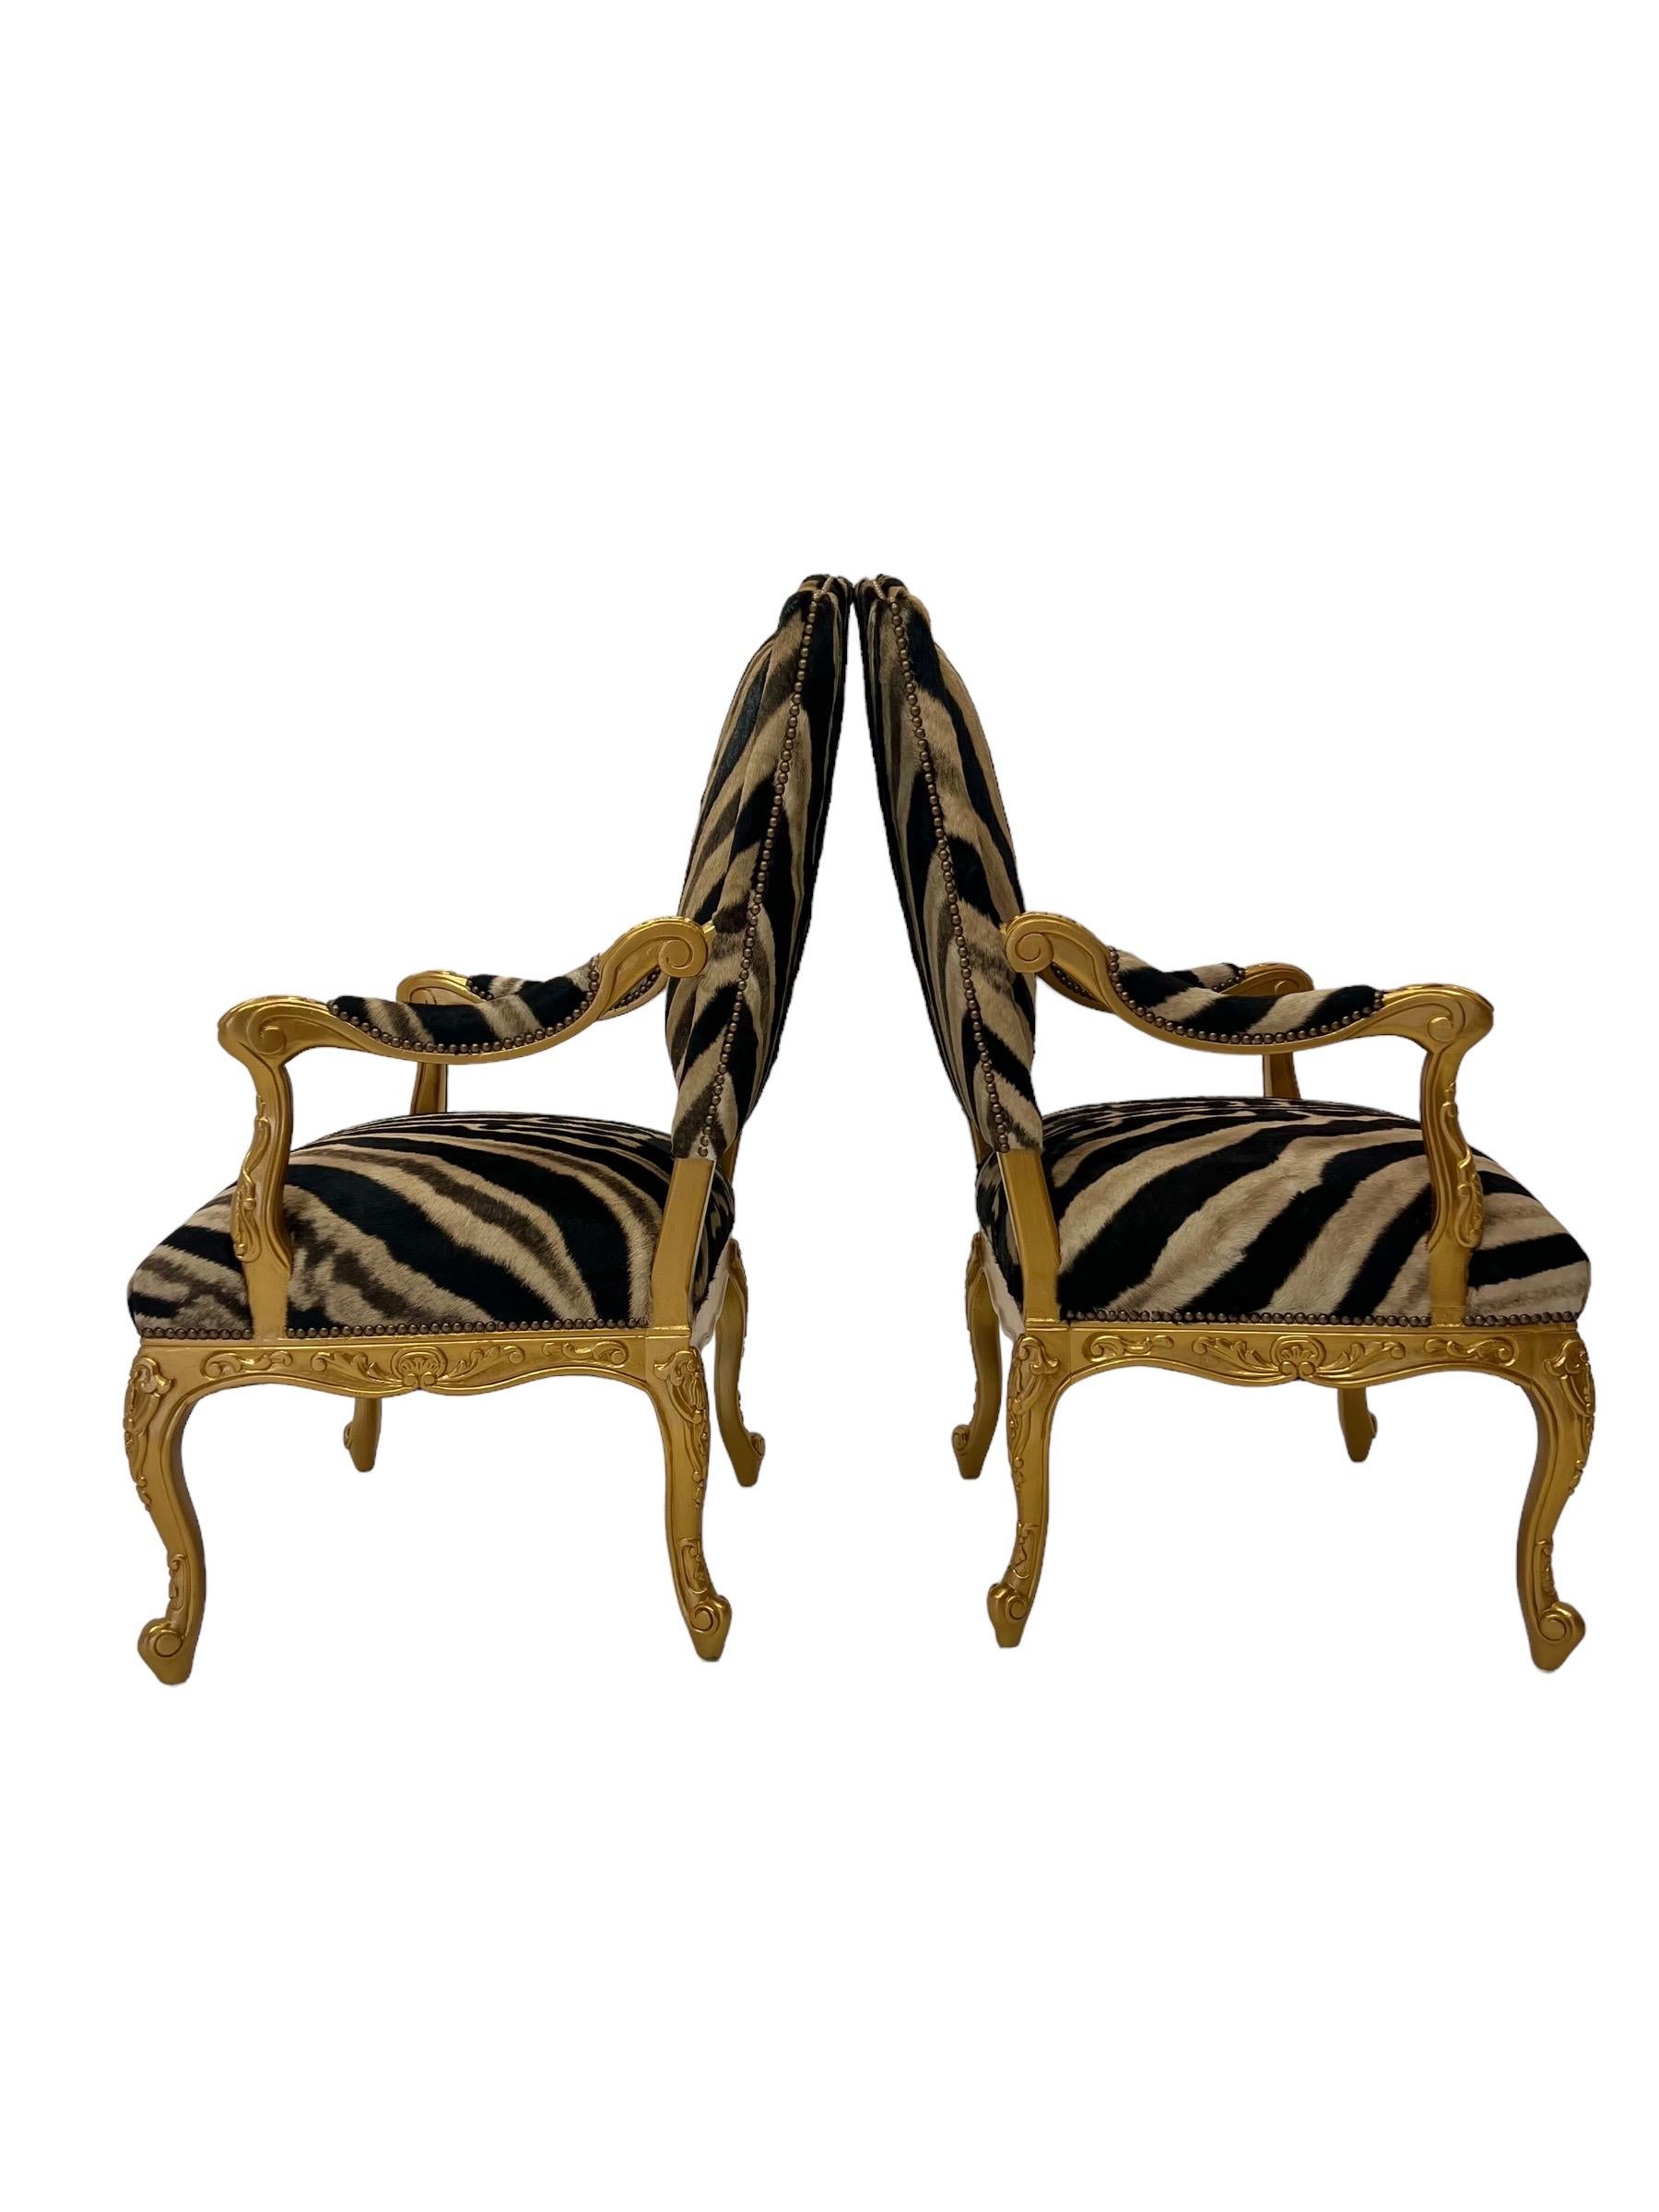 French Provincial French Empire Napoleonic Style Chairs in South African Zebra Hide For Sale